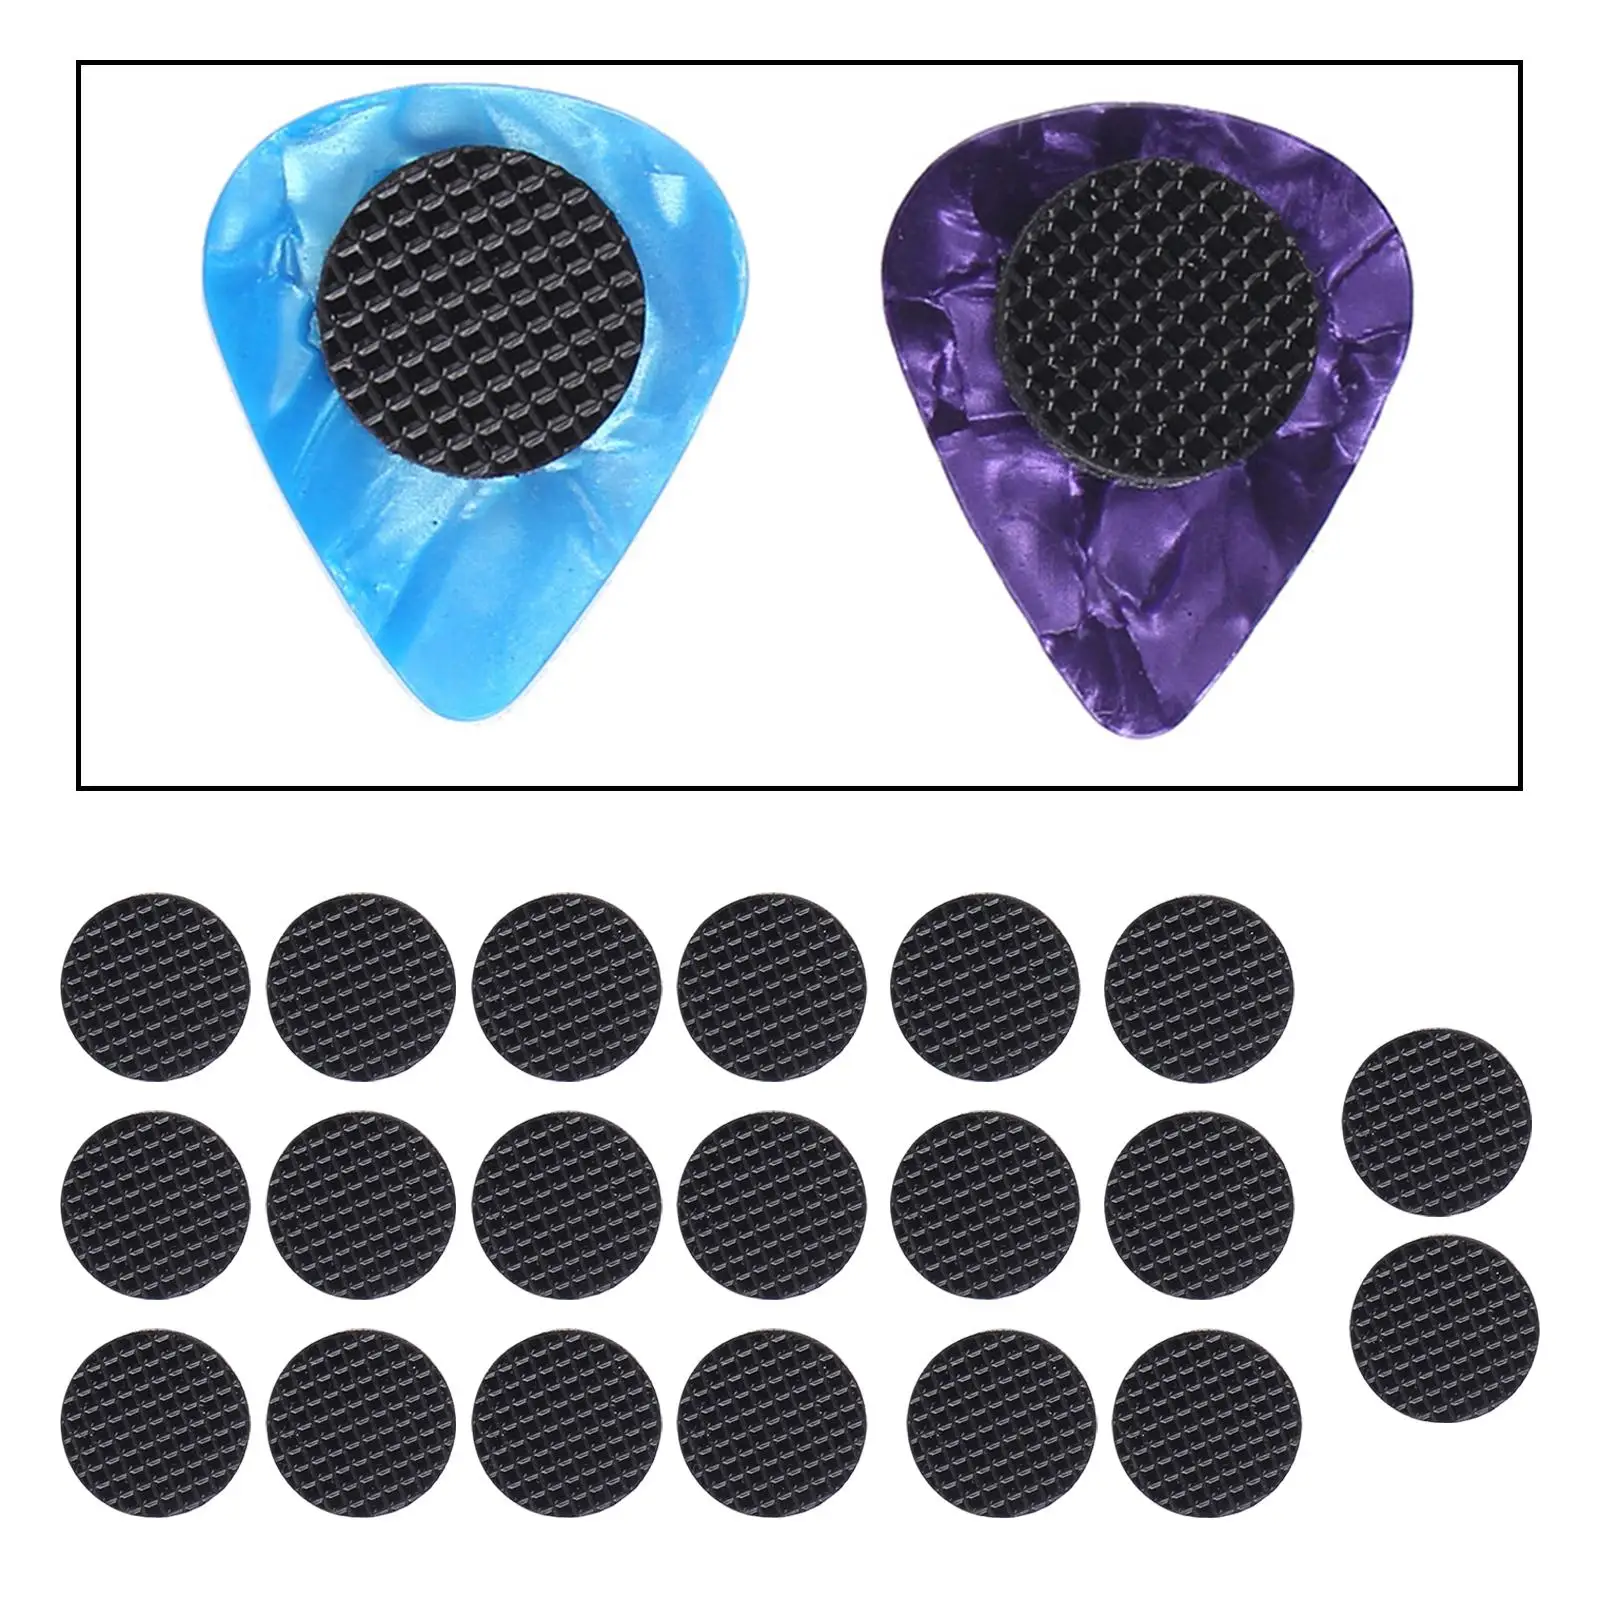 20x Grips for Guitar Picks Durable Soft Help You Hold Guitar Picks Tightly Comfortable